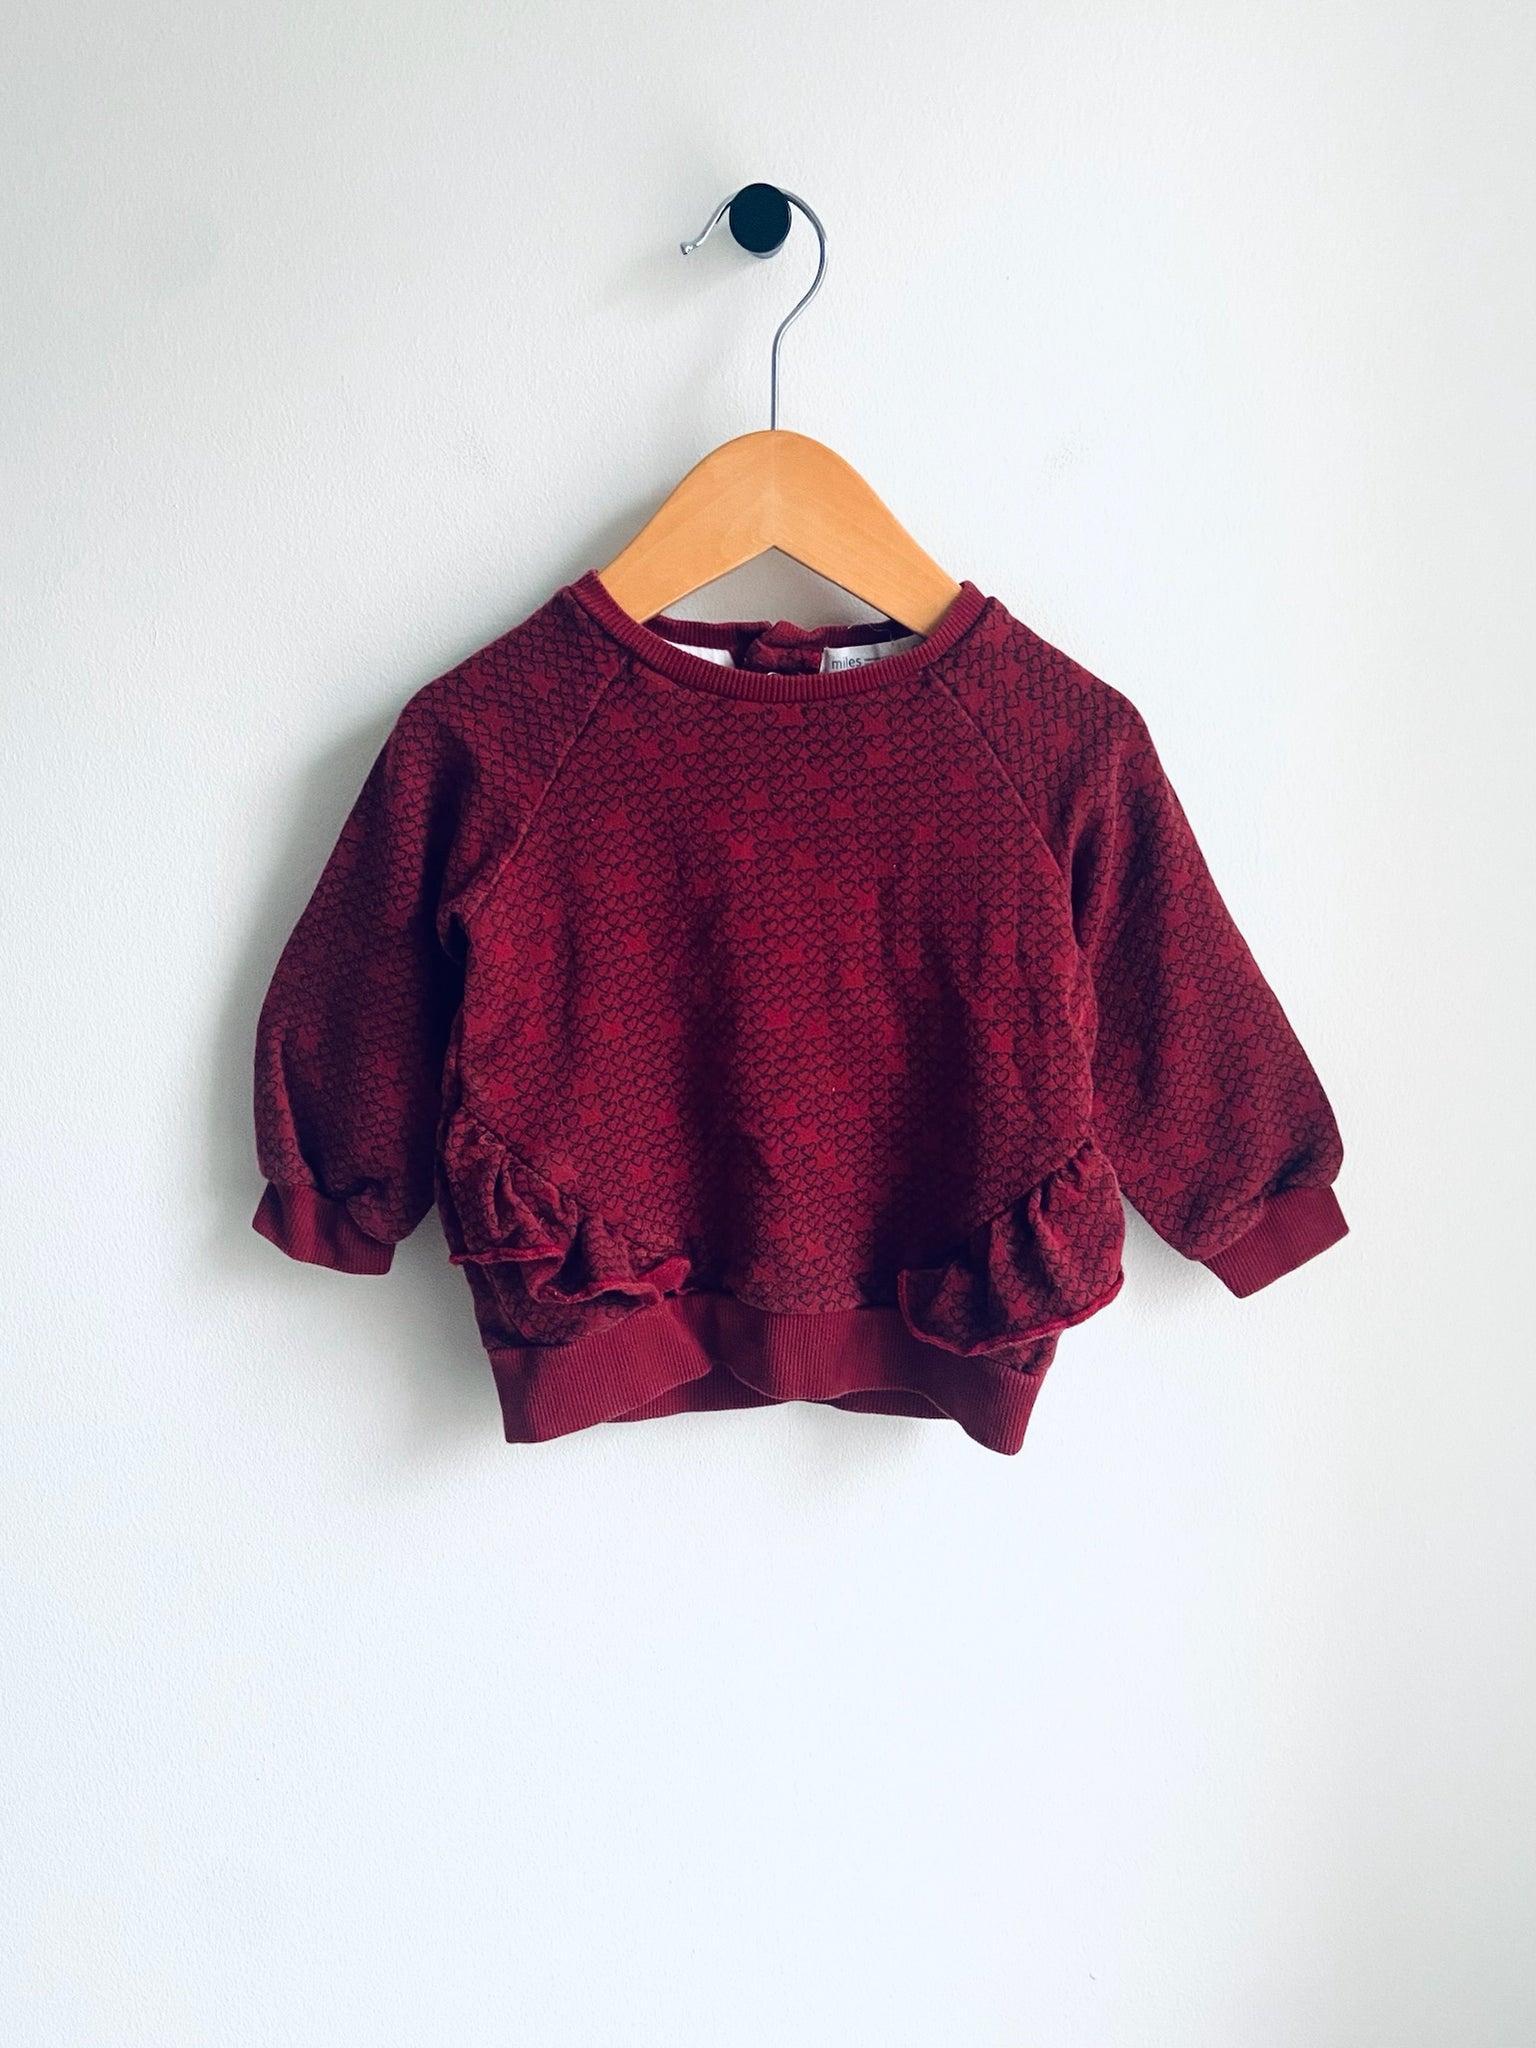 Miles Baby | Patterned Crewneck with Ruffles (12M)